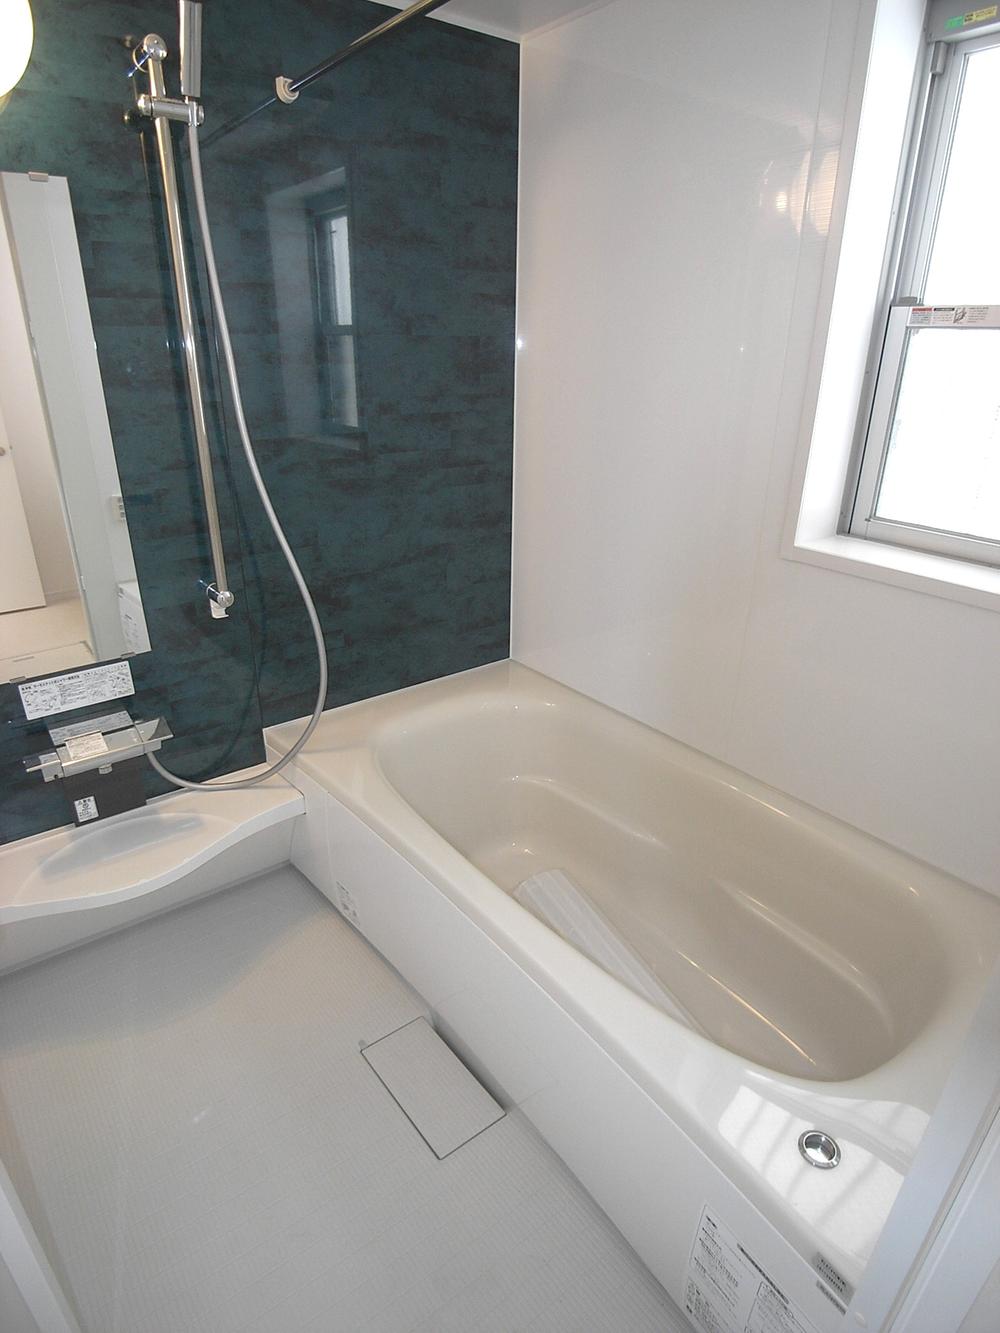 Same specifications photo (bathroom). The bathroom Example of construction